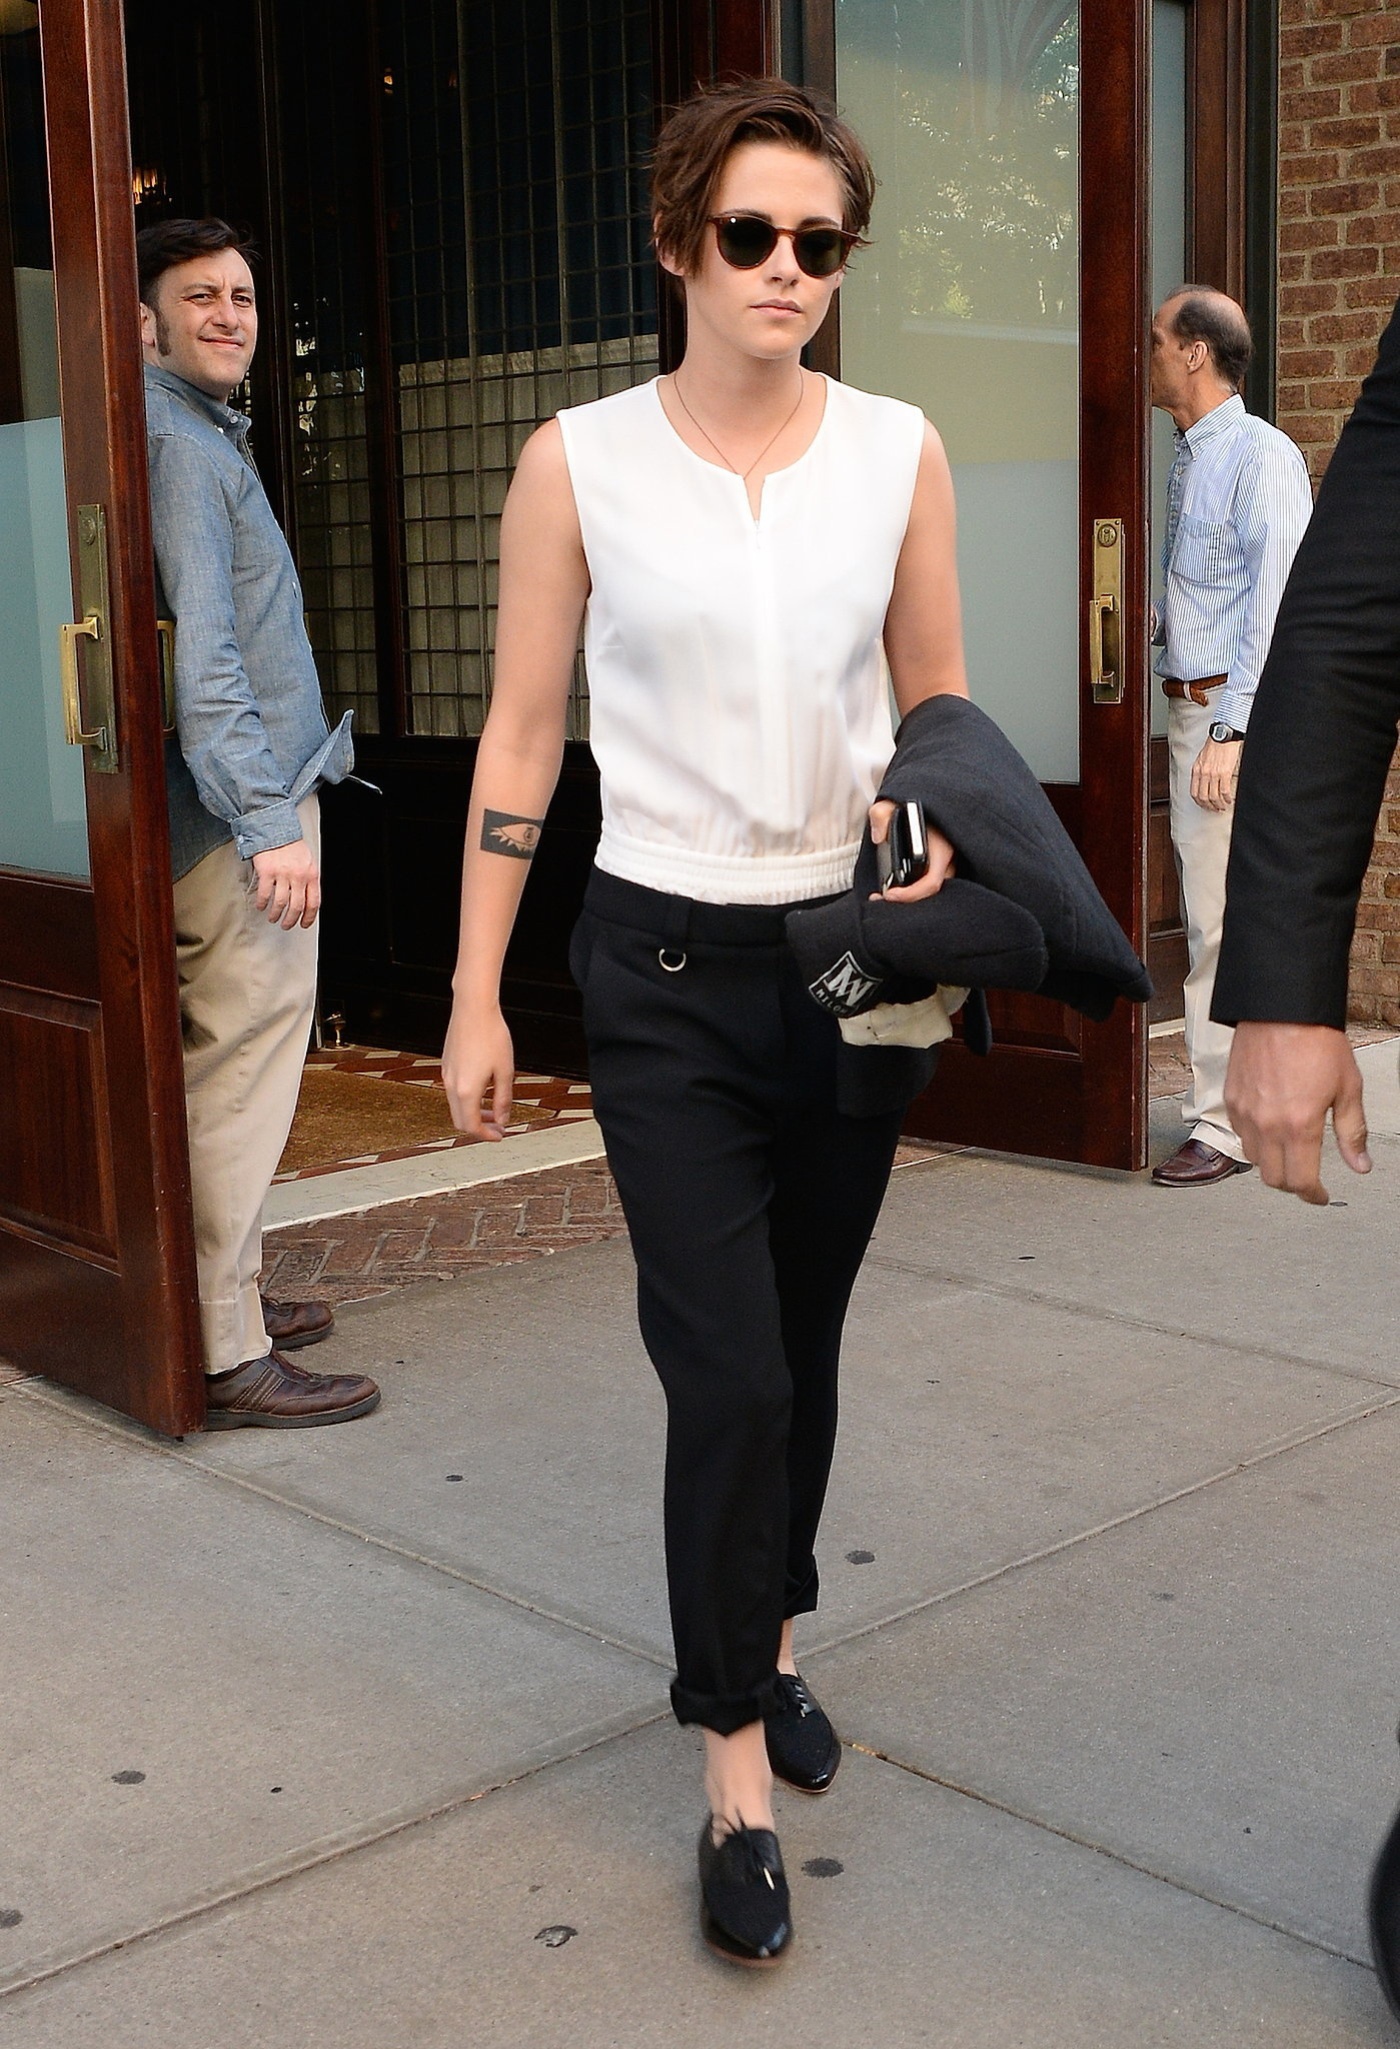 Kristen Stewart in NYC submitted by Canary + Rook